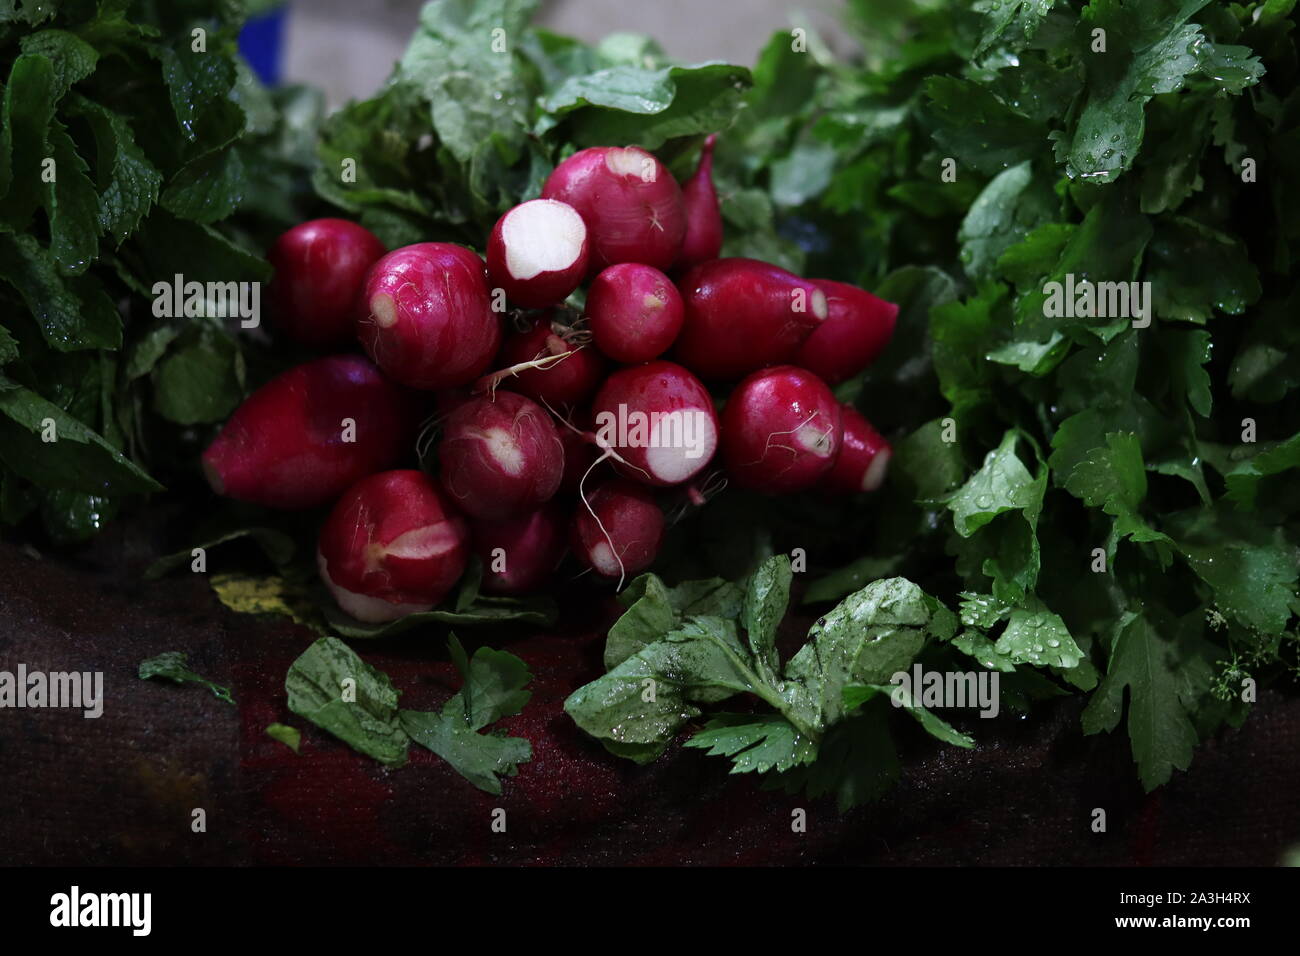 Radishes with green leaves on display in market Stock Photo